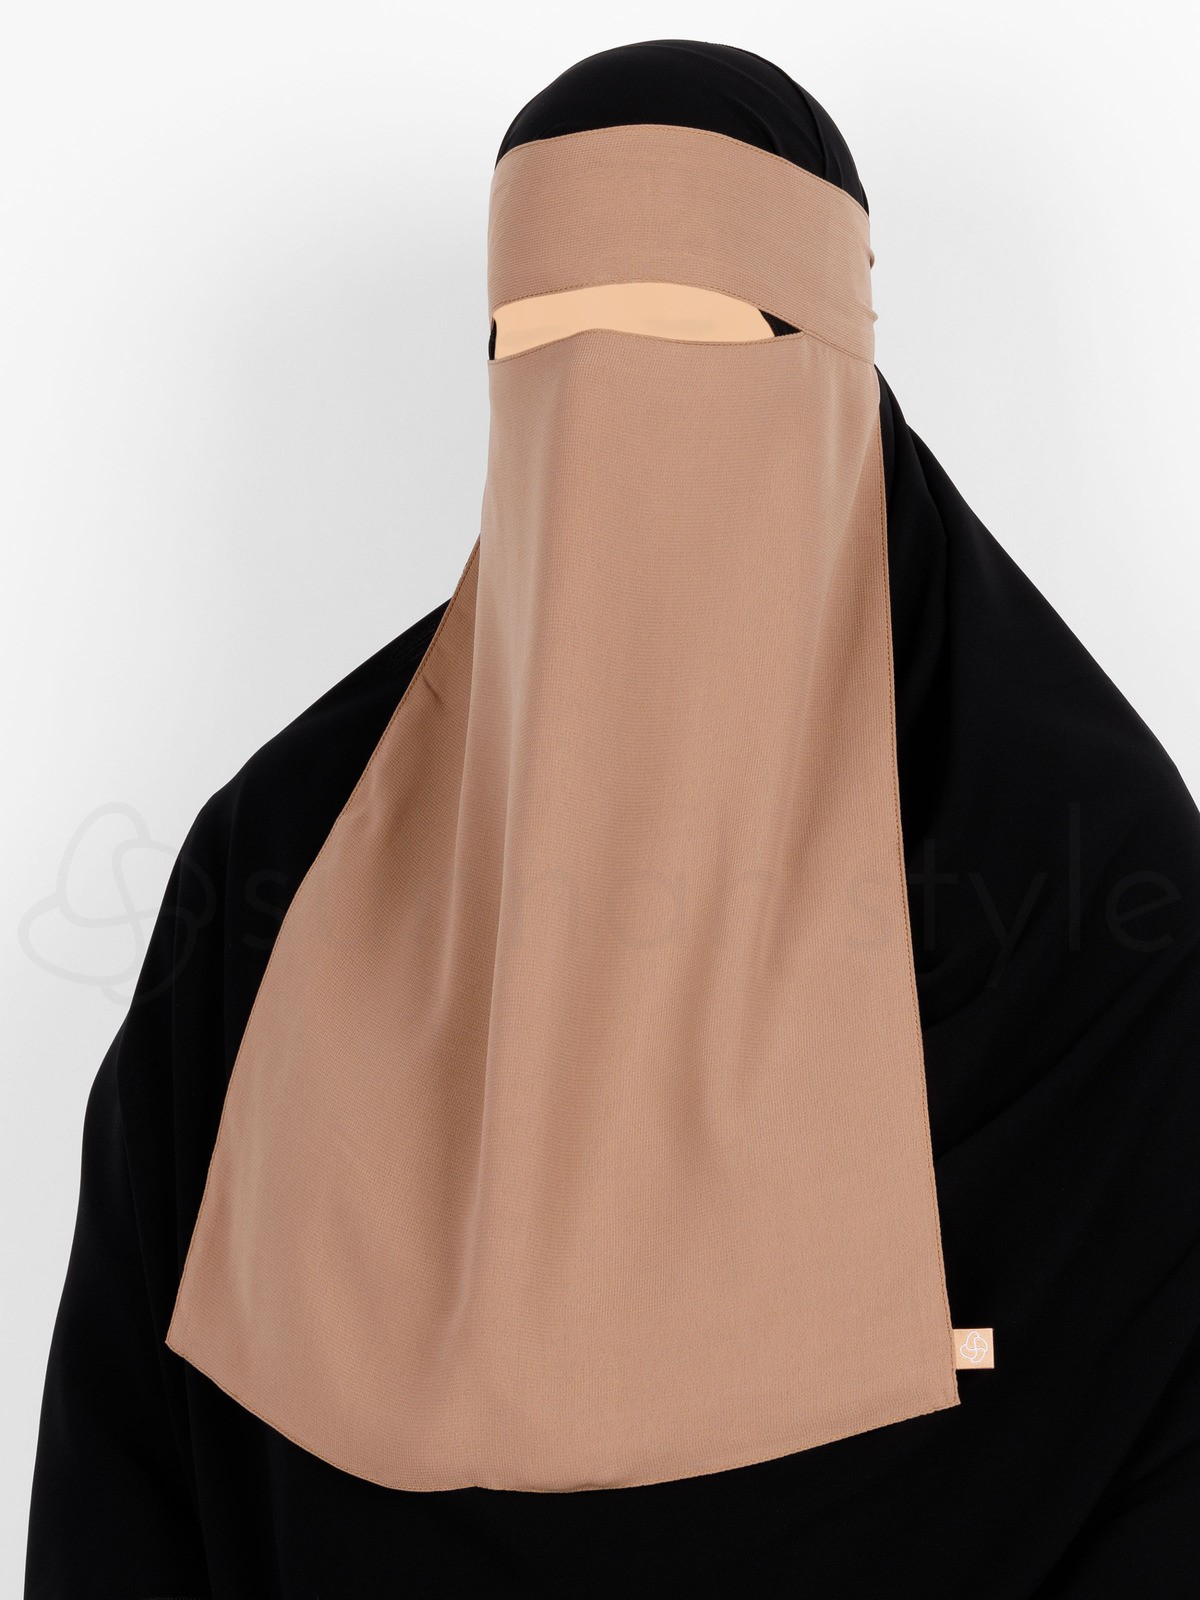 Sunnah Style - One Layer Niqab (Toffee)